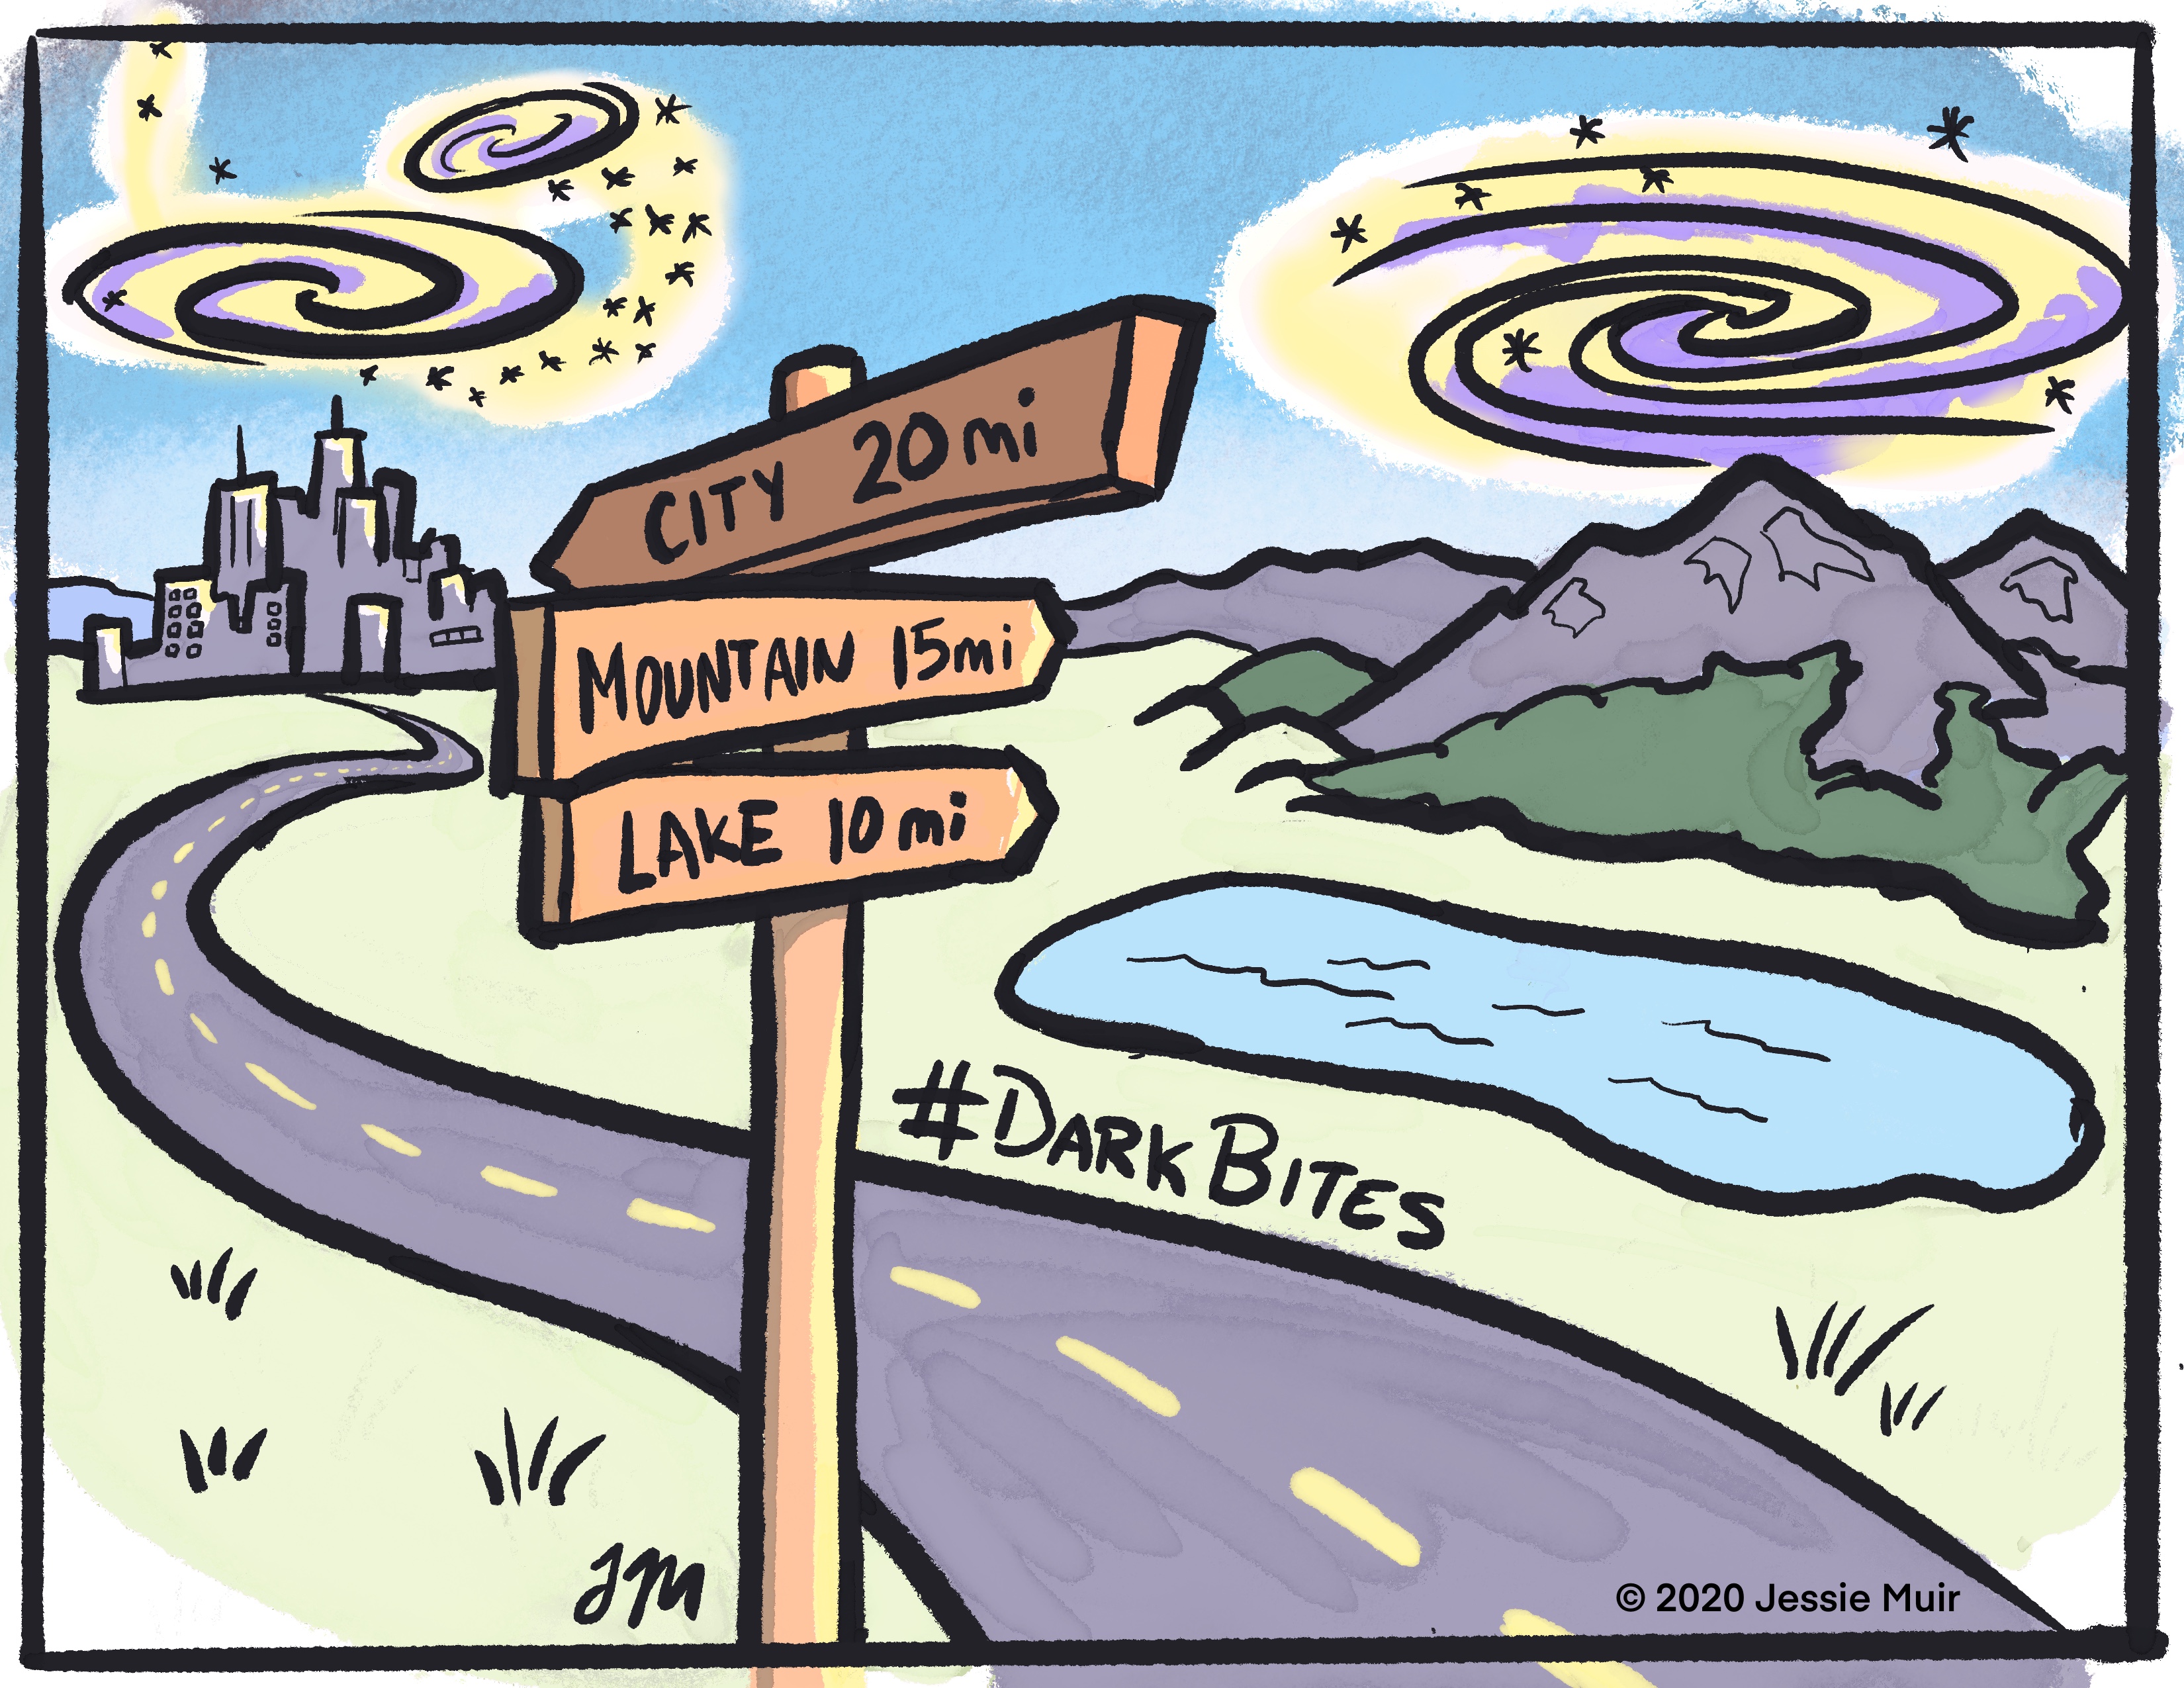 alt="Cartoon of a landscape showing galaxies floating over landmarks, with a road sign showing distances to them."